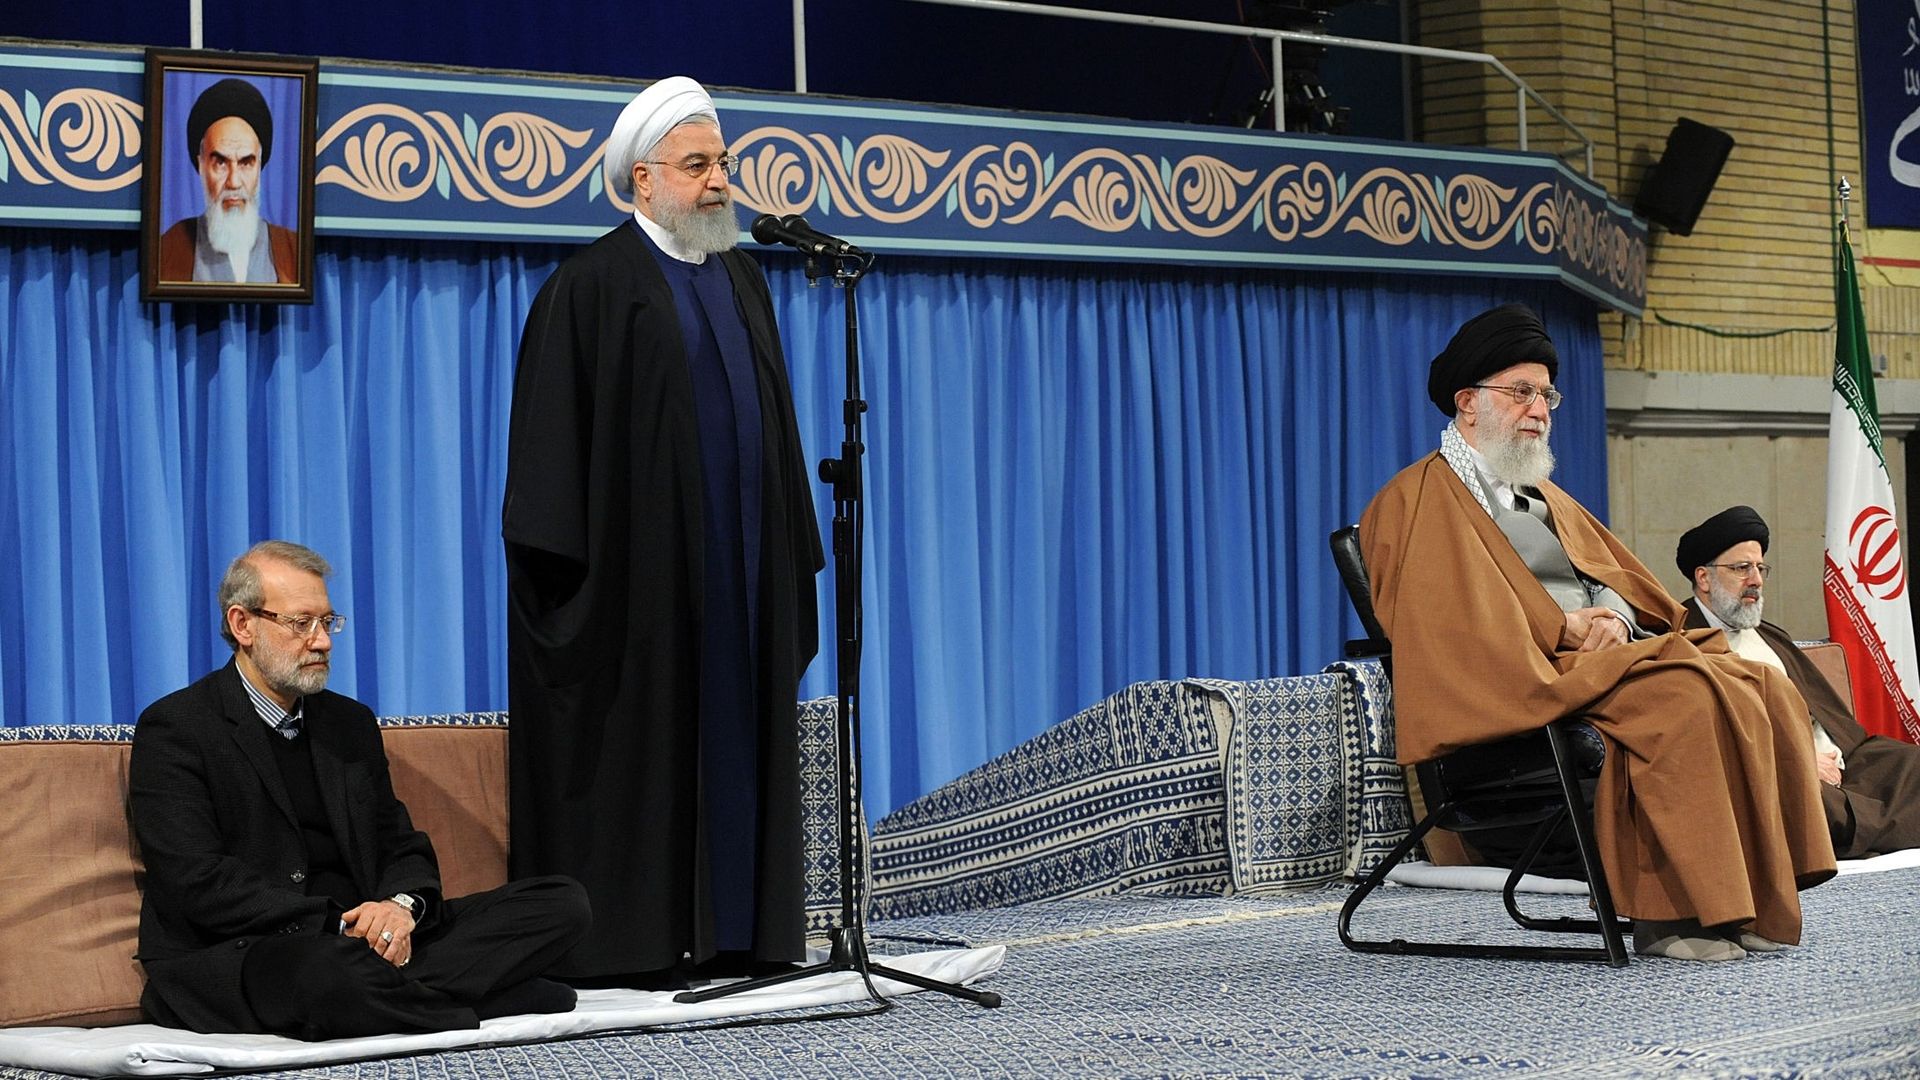 Rouhani and Khamanei on stage together